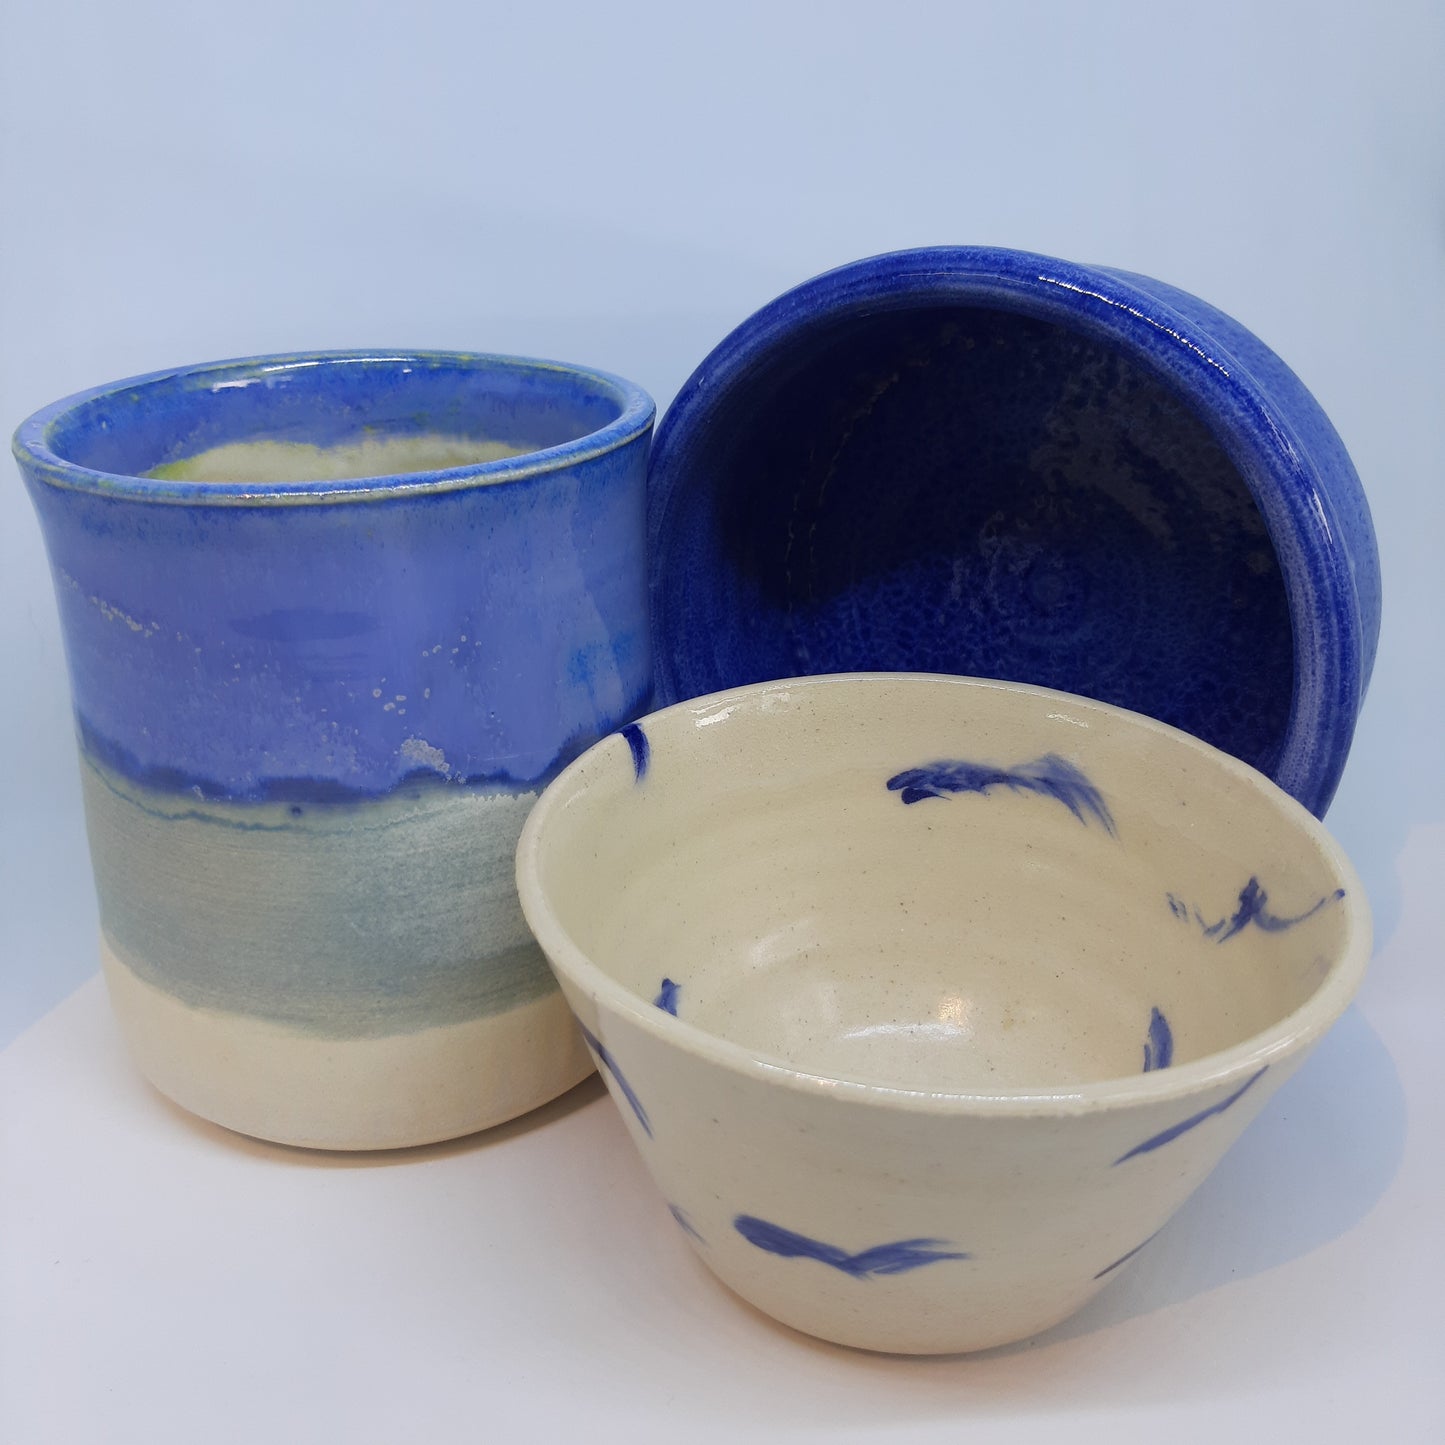 6 Week Ceramic Decoration Course Over 16s (Starting Thursday 17th Aug 2023)